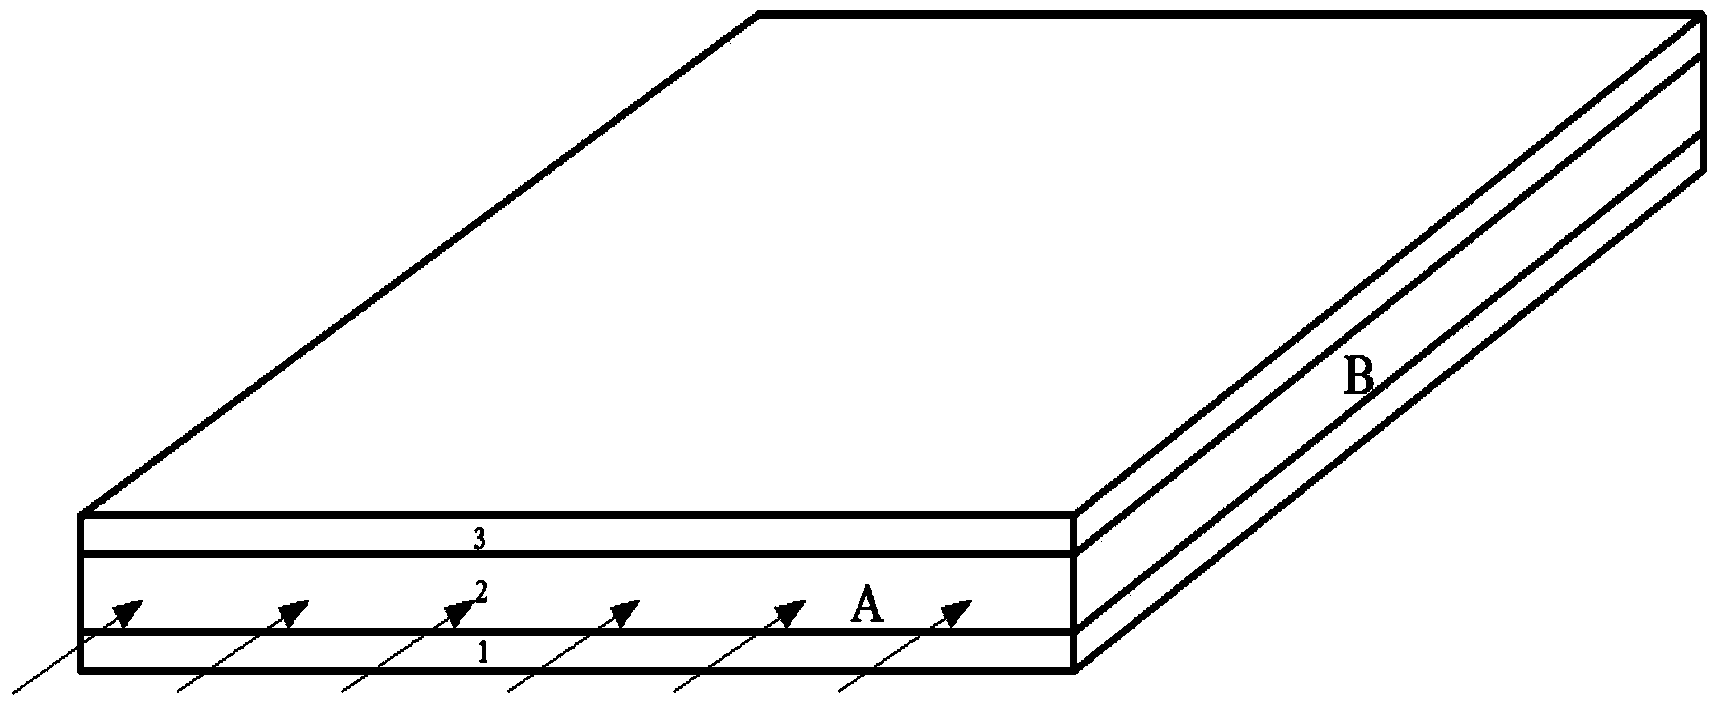 Low-frequency vibration-isolation combined sandwiched structure